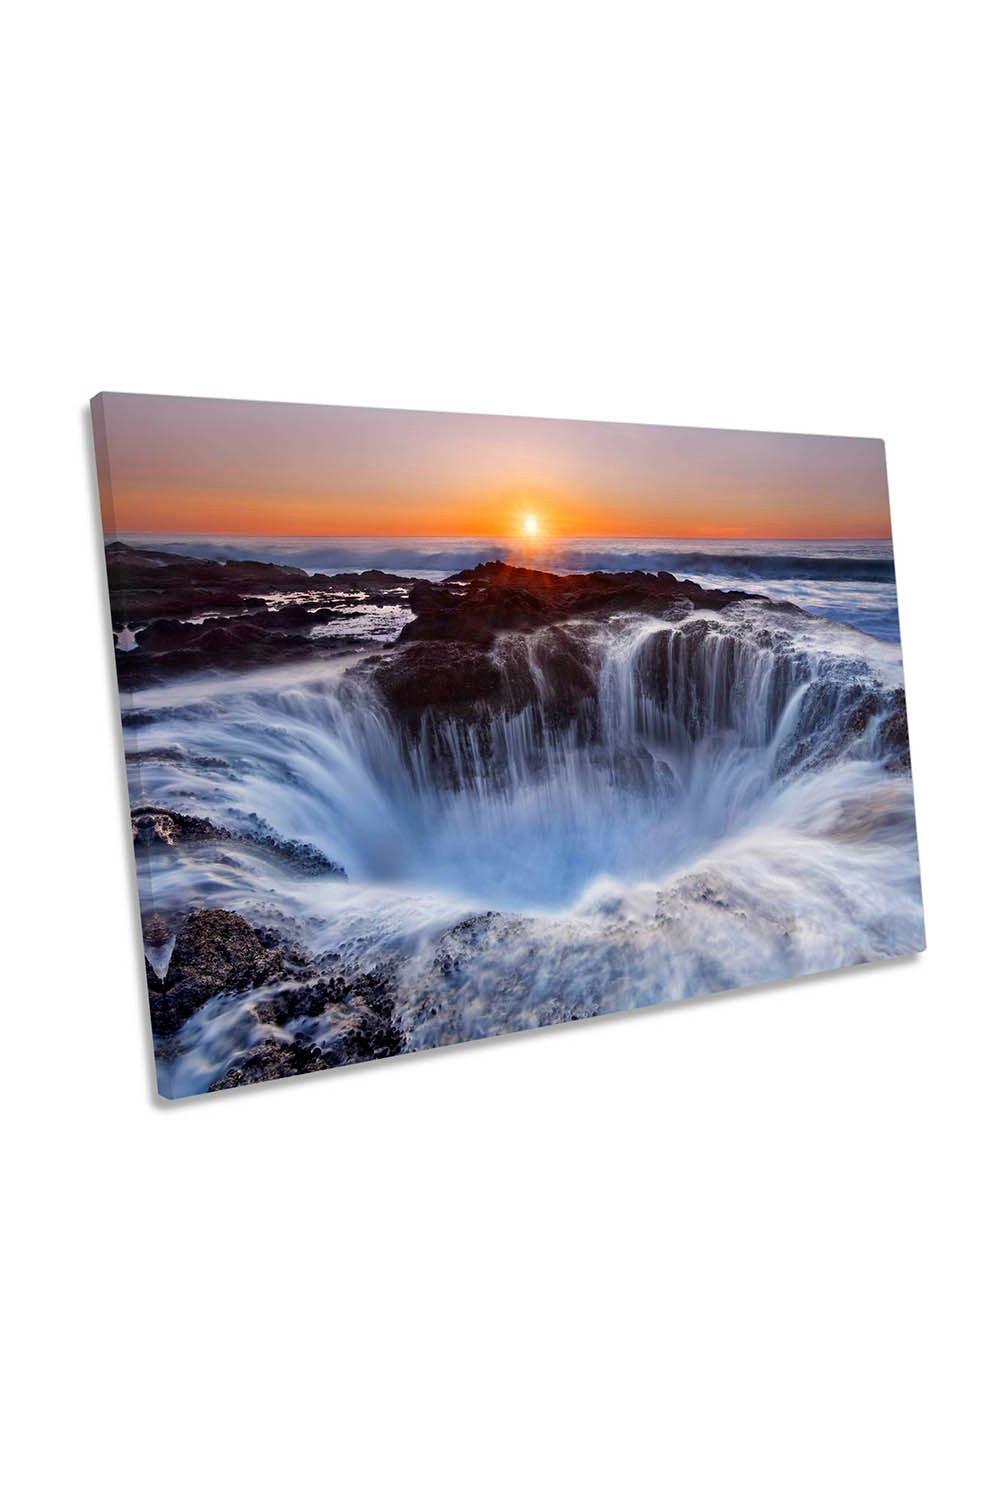 Thorsa Well Seascape Sunset Canvas Wall Art Picture Print